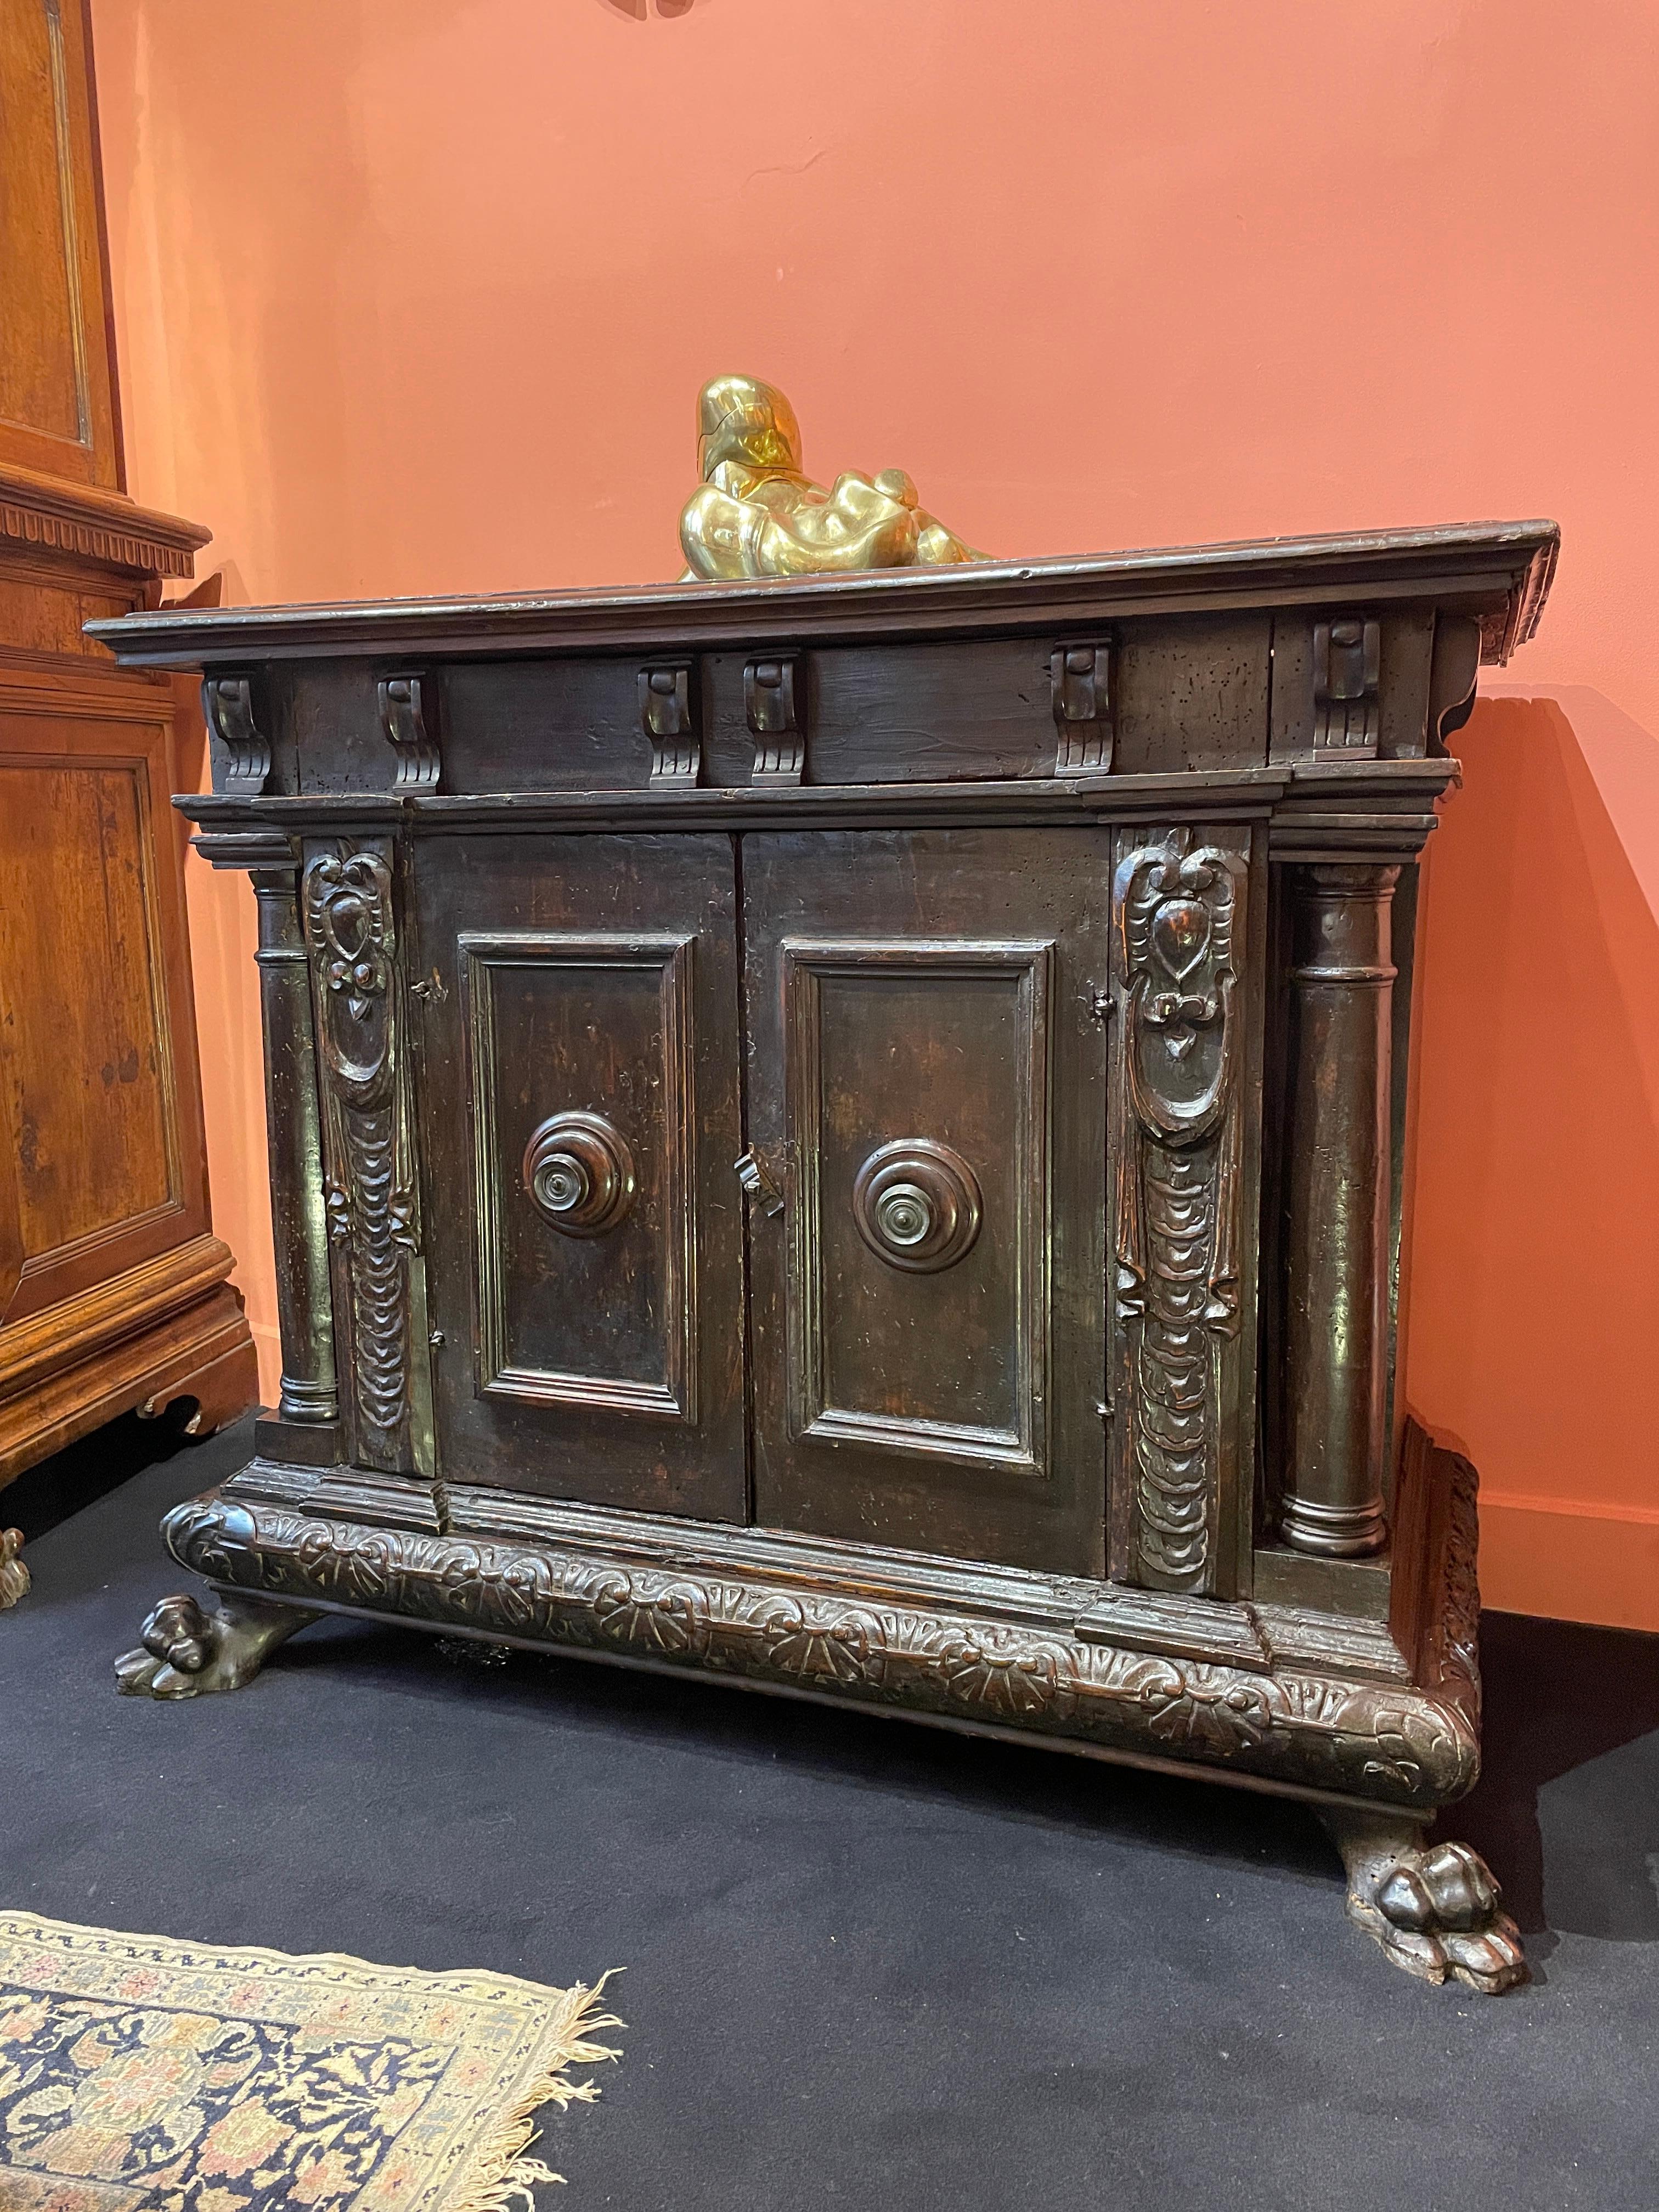 FLORENTINE CREDENZA WITH CORNER COLUMNS


ORIGIN : TOSCANY, ITALY 

PERIOD : LATE 16th CENTURY

Height: 84 cm 
Width: 101 cm
Depth: 48 cm

Walnut wood

Although the first Italian credenza in the form of a sideboard were very simple, they soon